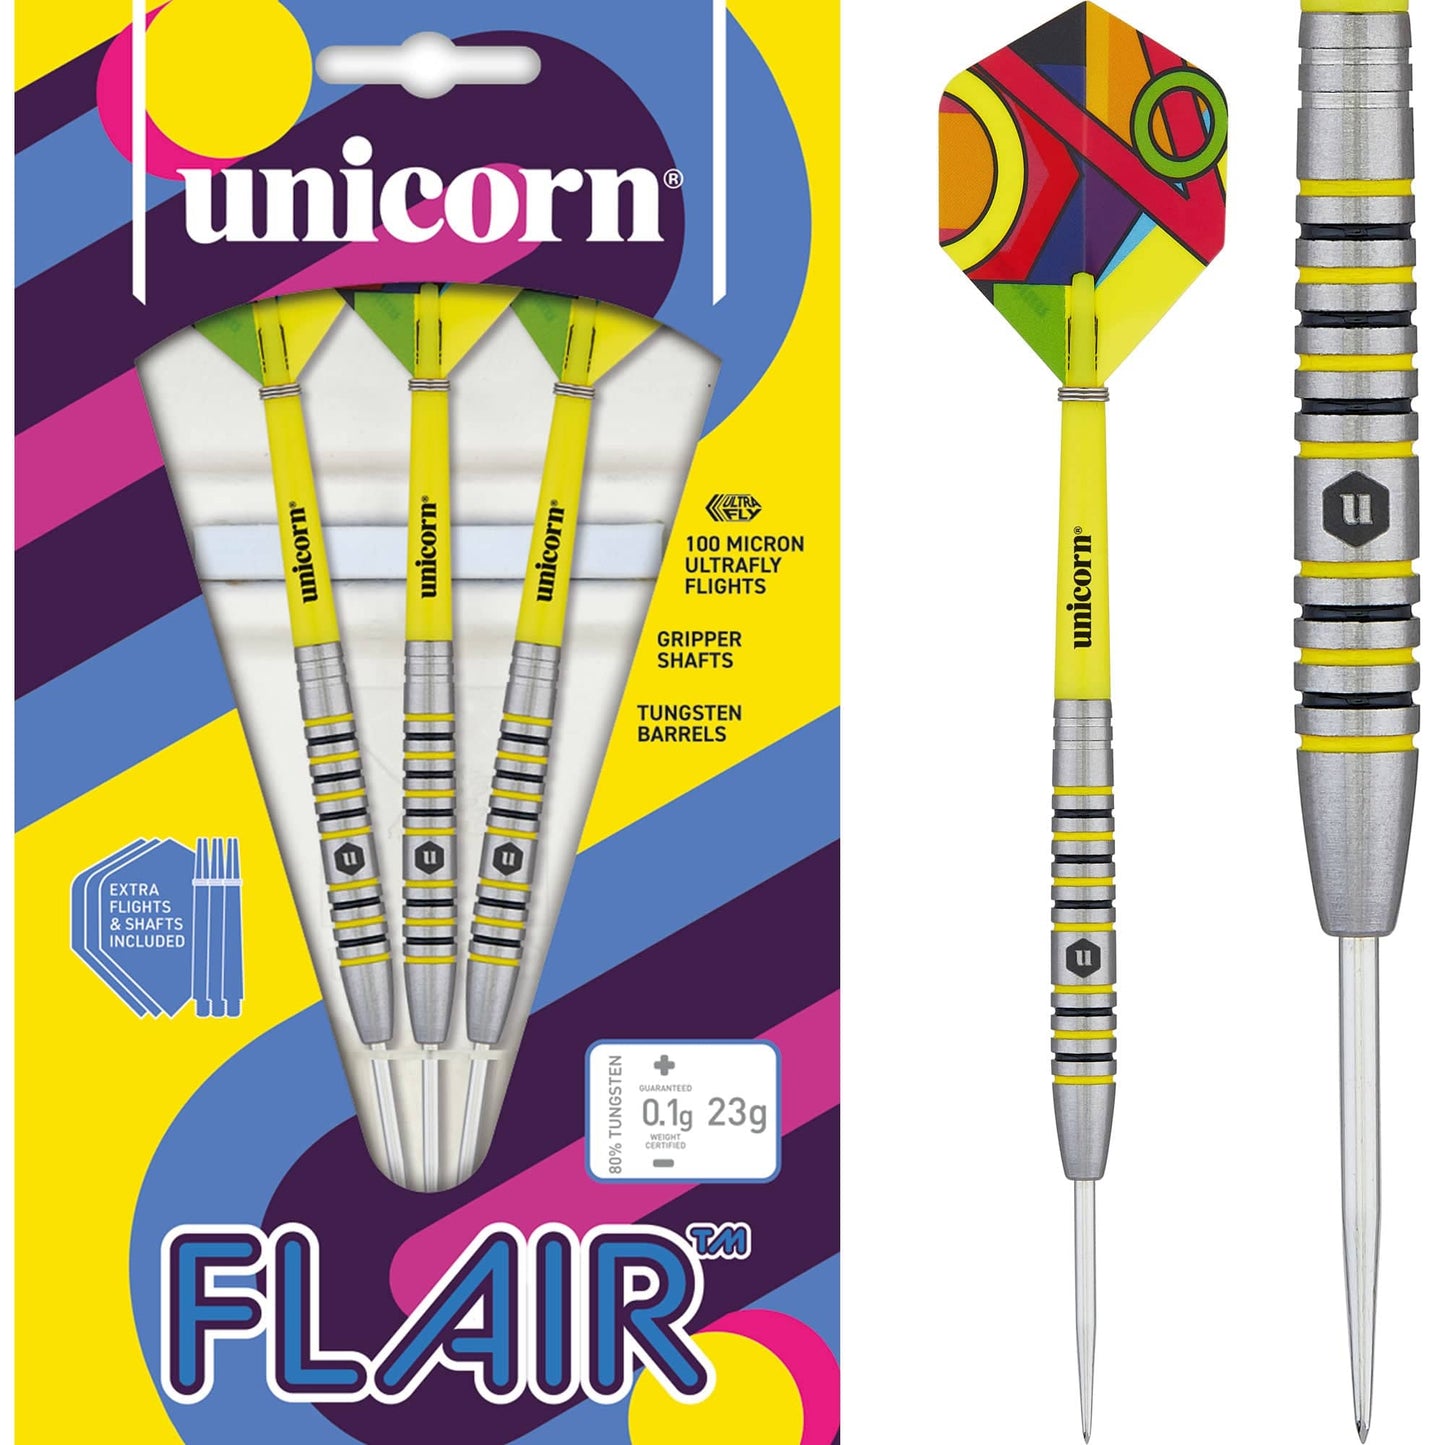 Unicorn Flair Darts - Steel Tip - Style 4 - Colour Ringed 23g